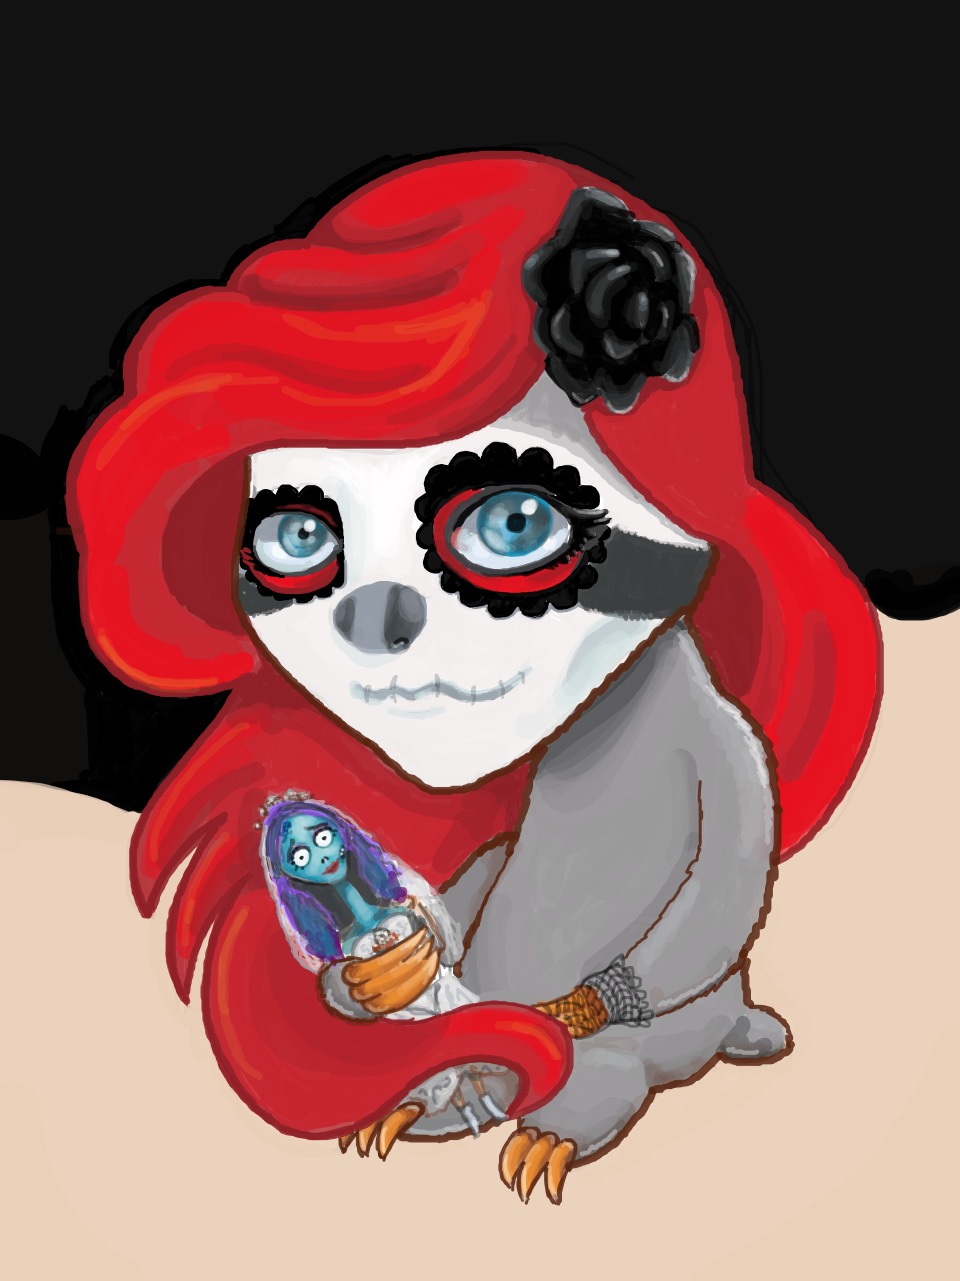 A chibi-style sloth with bright red hair and day of the dead make-up, holding an action figure of Emily from Corpse Bride.